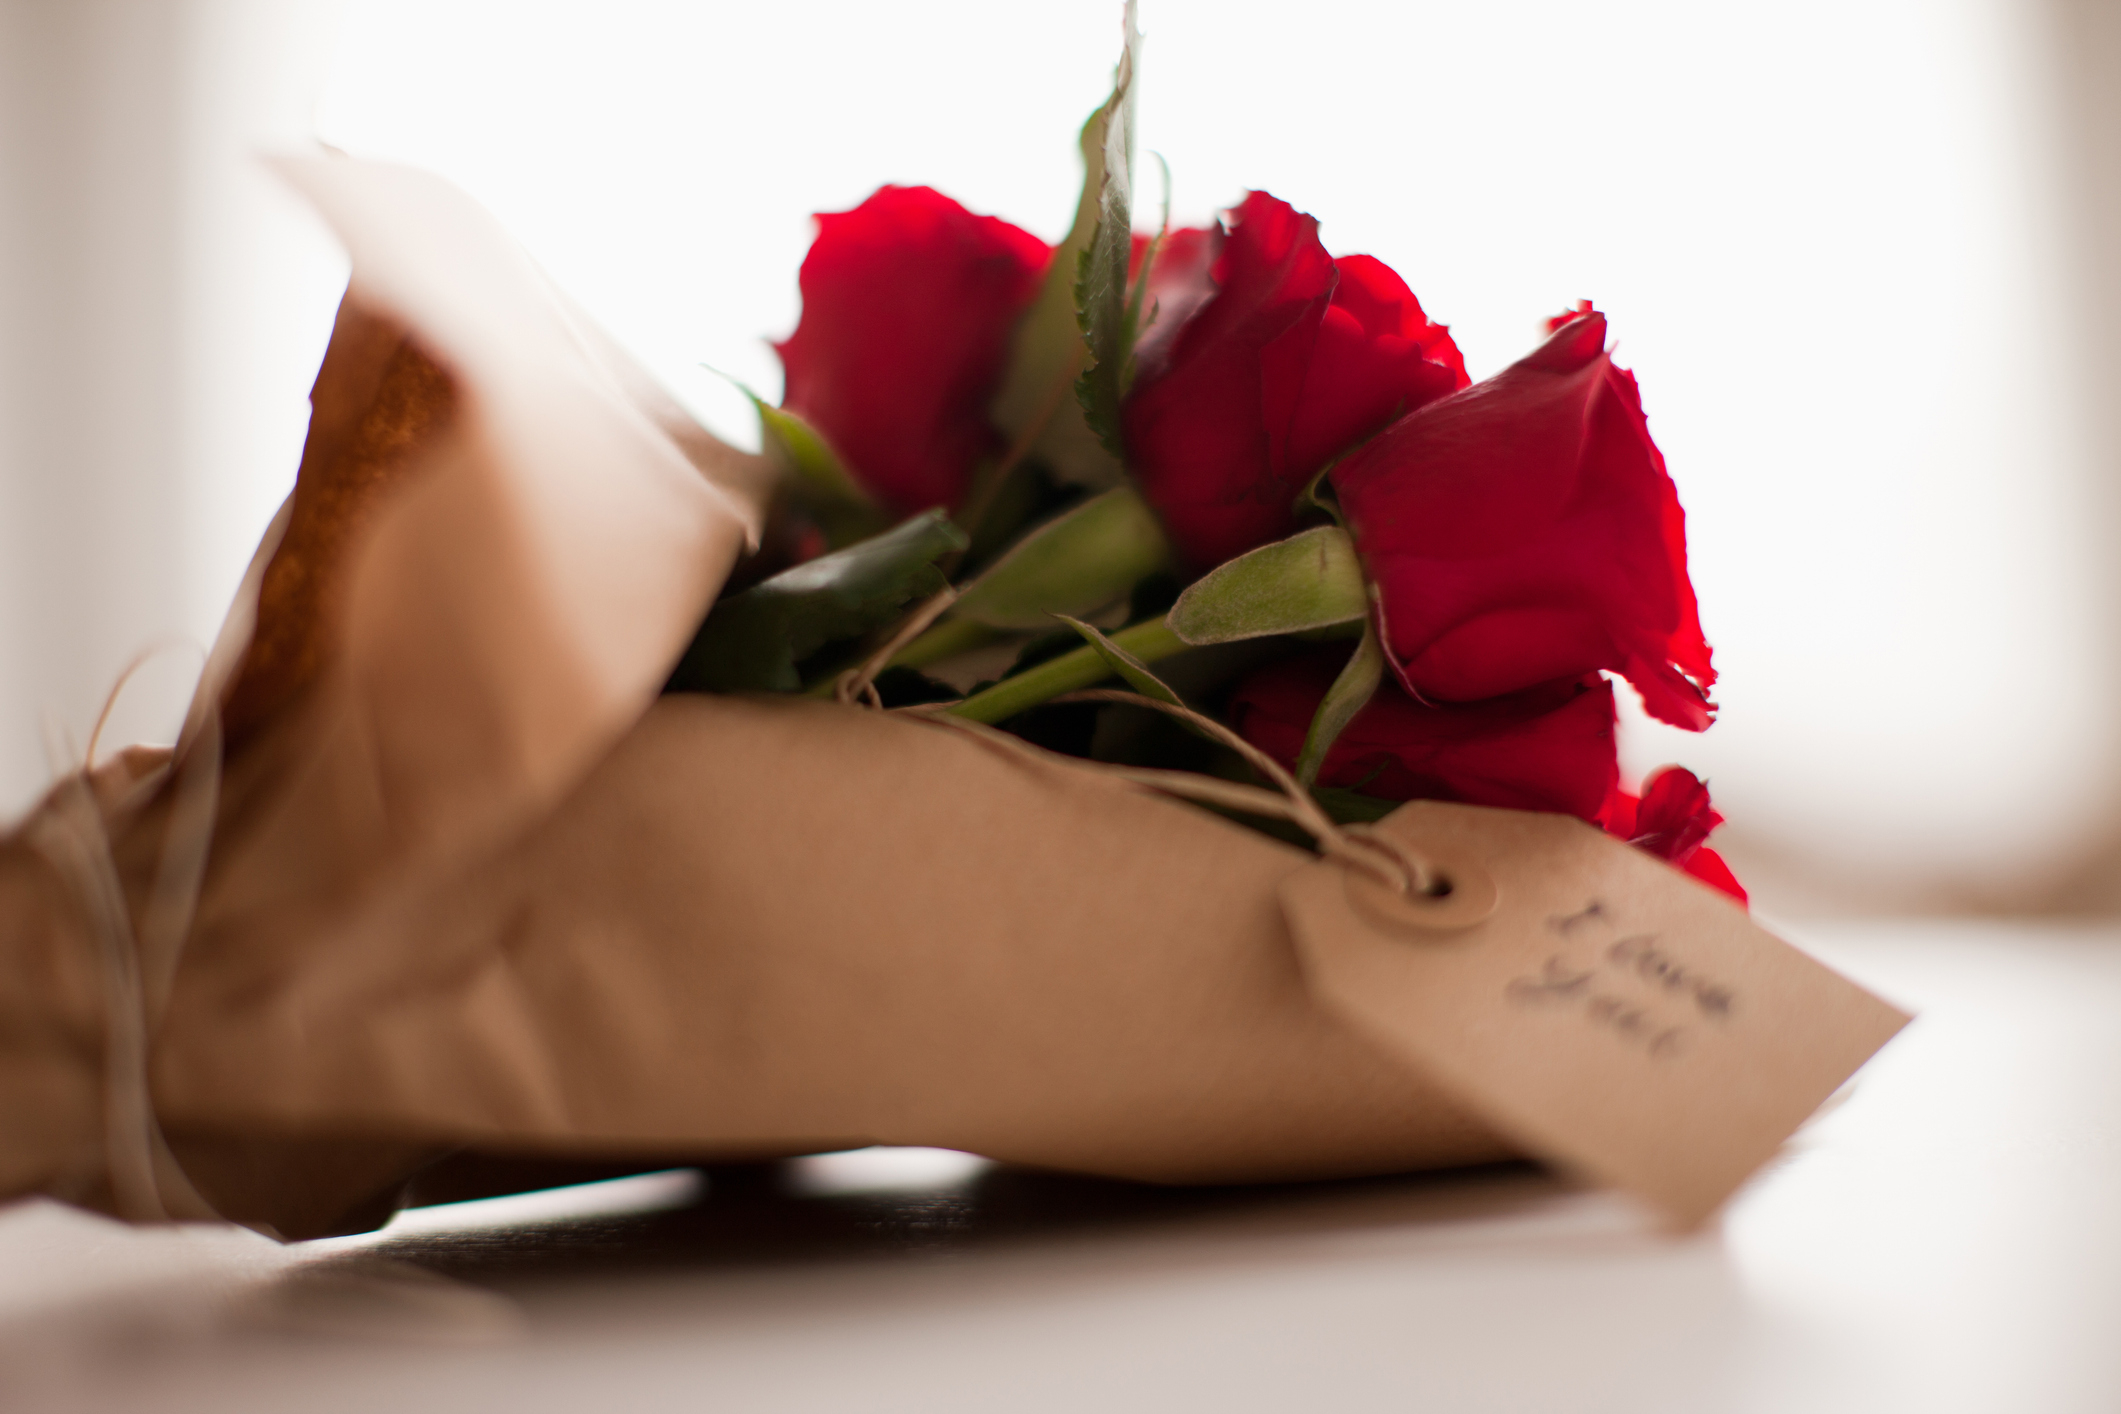 Bouquet of red roses wrapped in paper with a tag, possibly a romantic gift